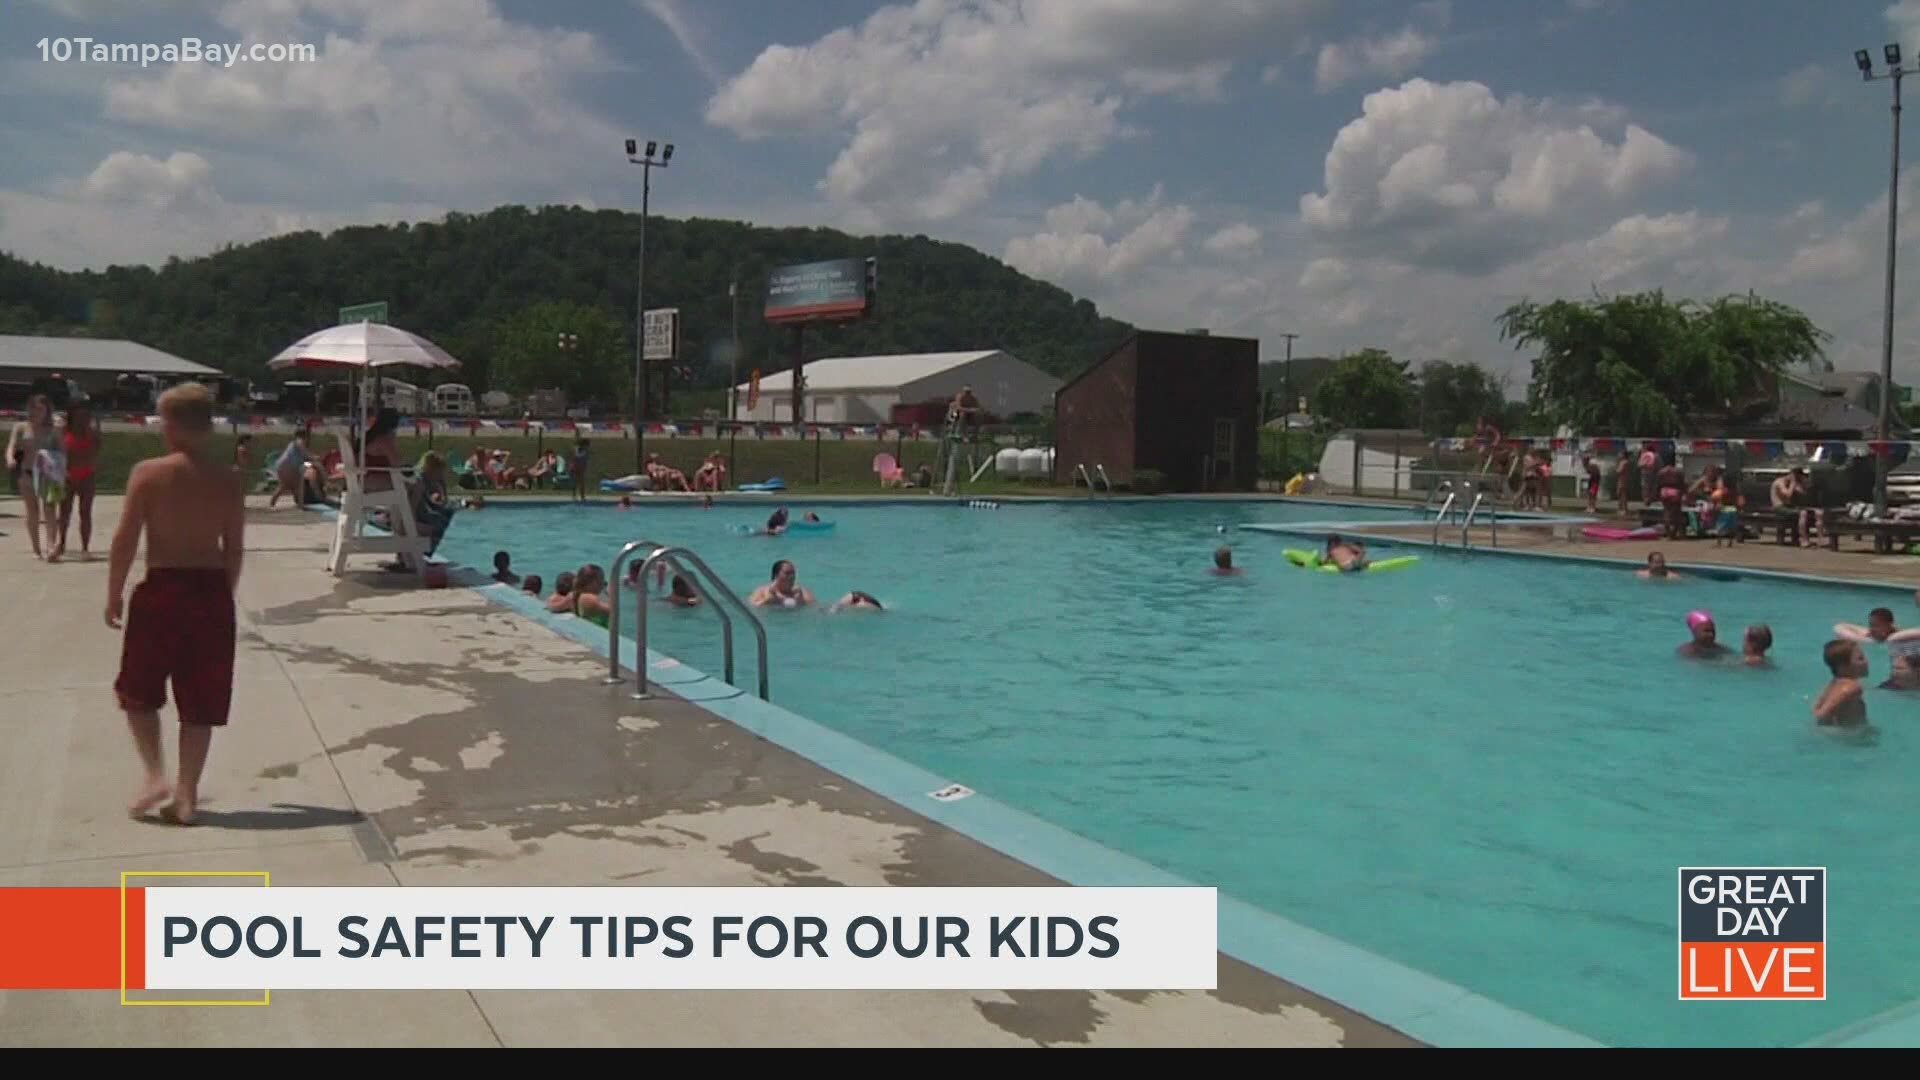 Pool safety tips for our kids